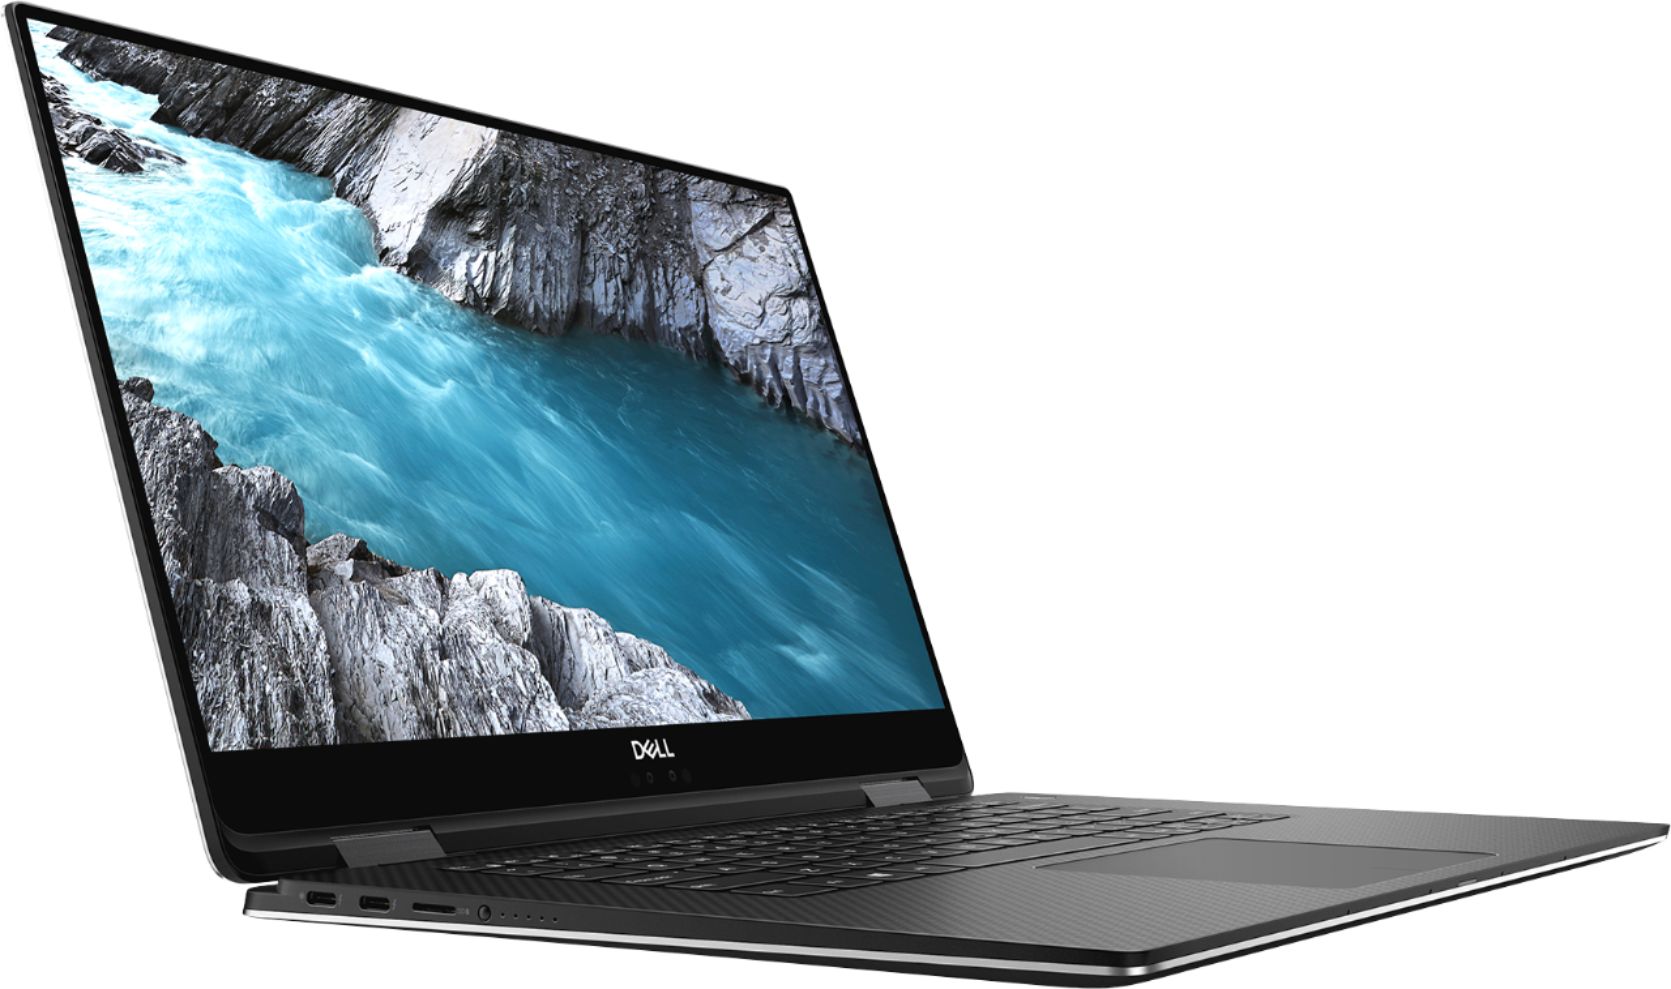 Angle View: Dell - Geek Squad Certified Refurbished XPS 15.6" Touch-Screen Laptop - Intel Core i7 - 16GB Memory - AMD Radeon RX - 256GB SSD - Black